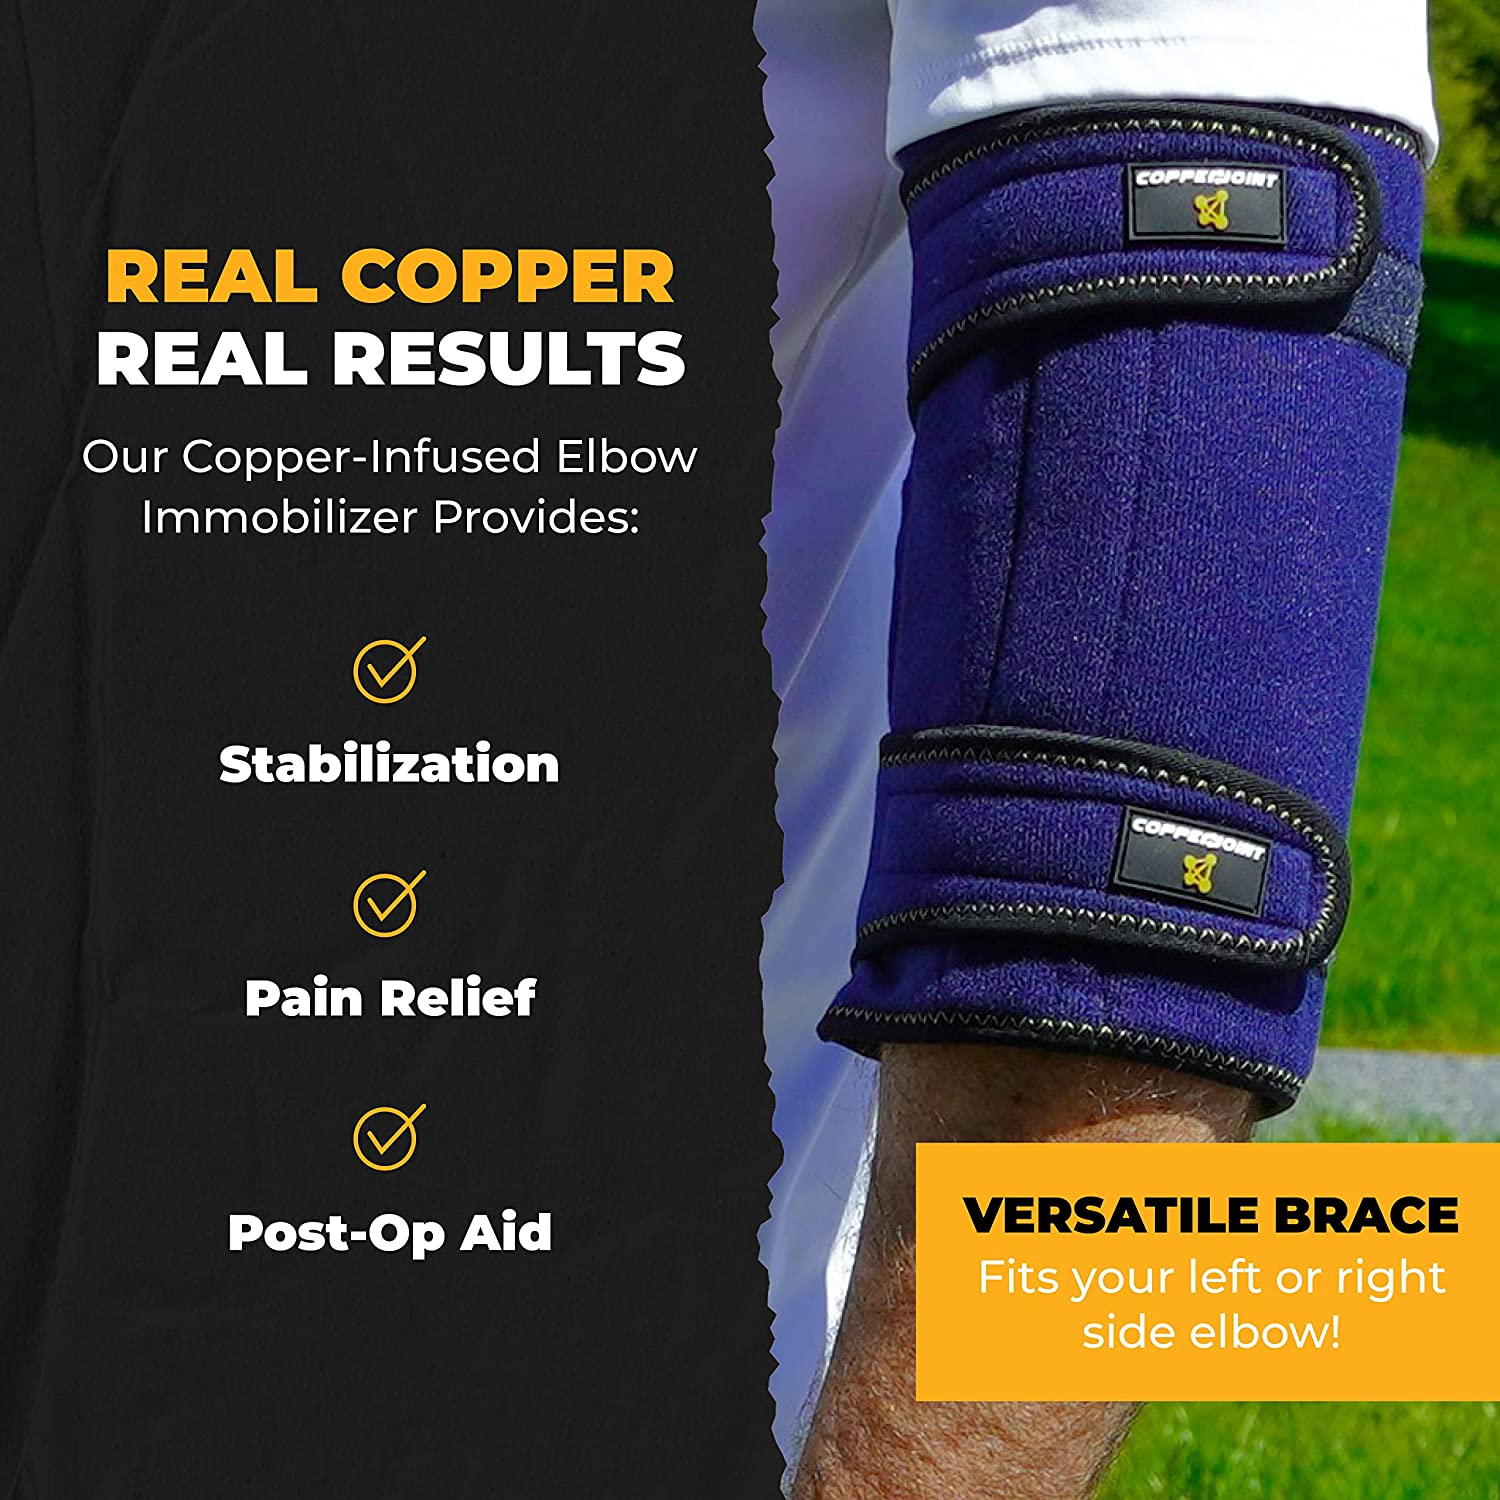 CopperJoint Launches New Ulnar Nerve Brace On Amazon